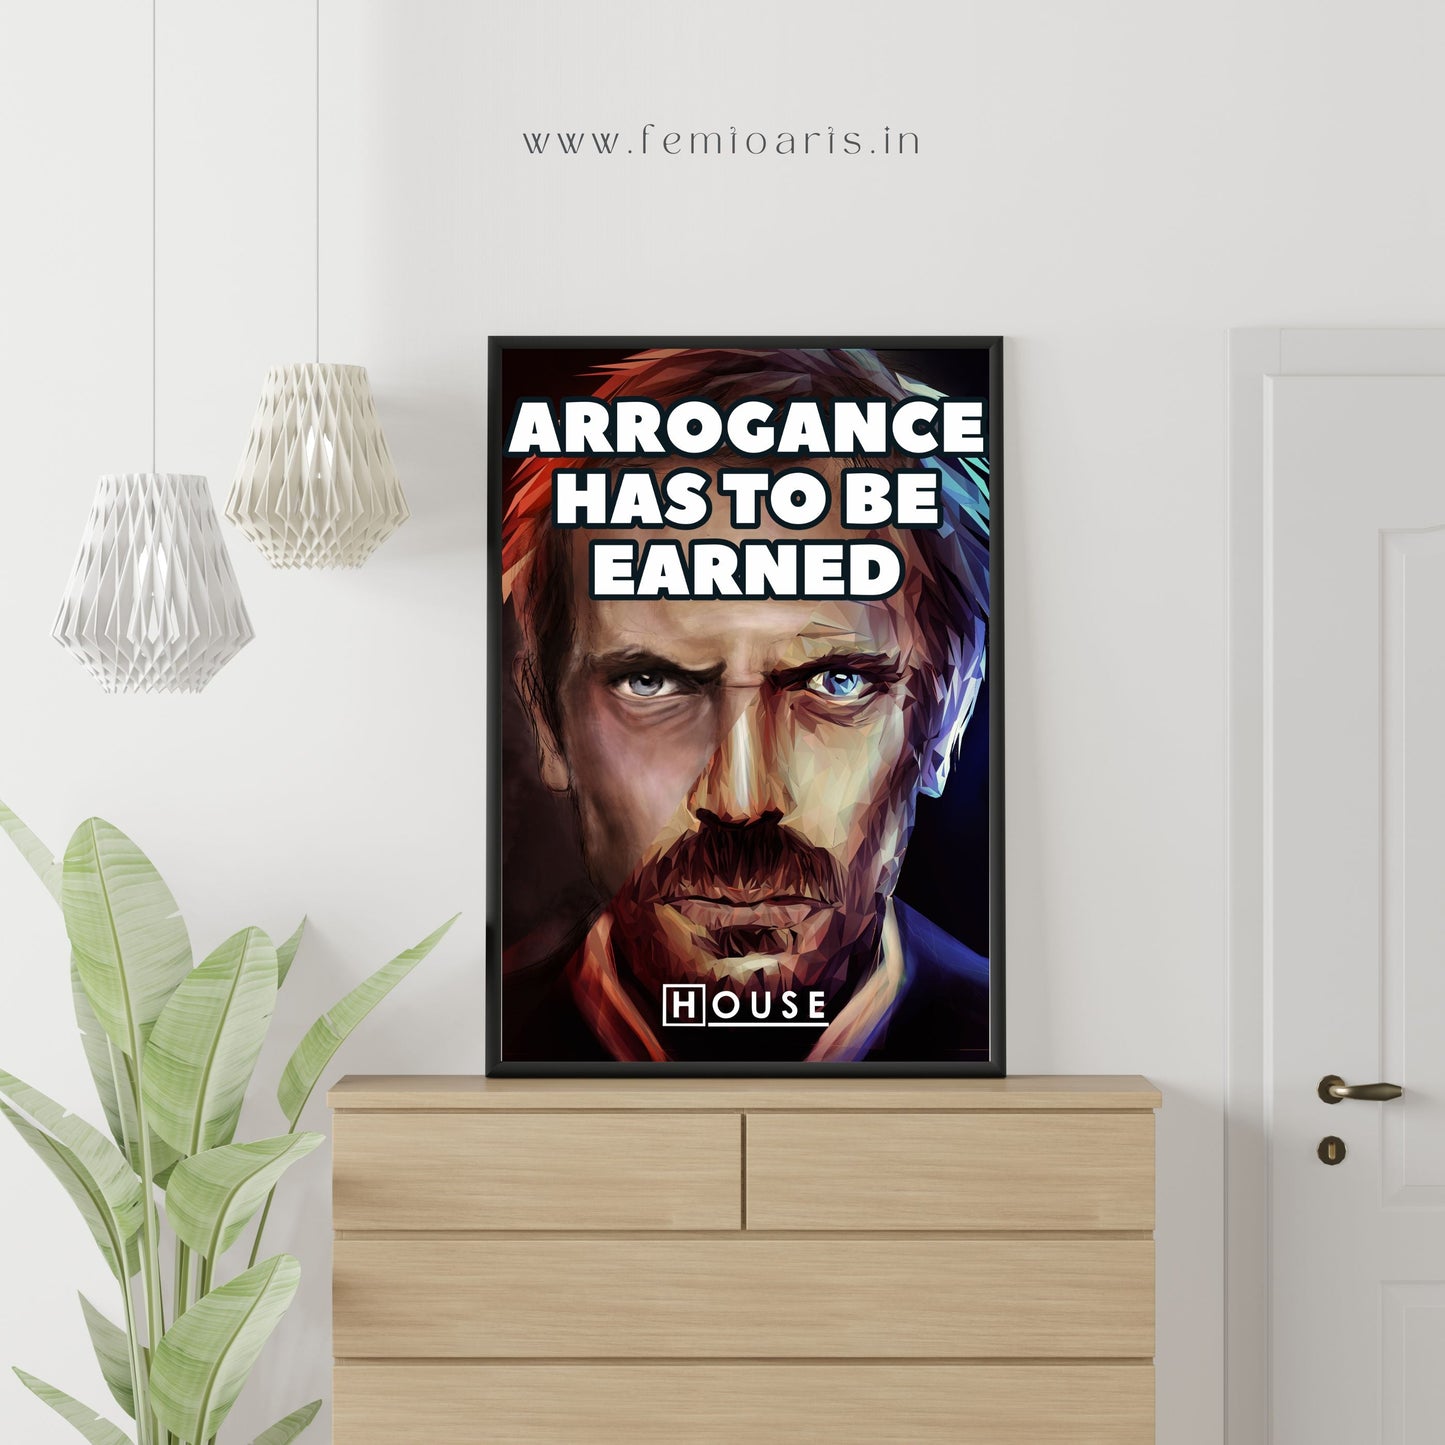 Dr. House - Arrogance has to be earned